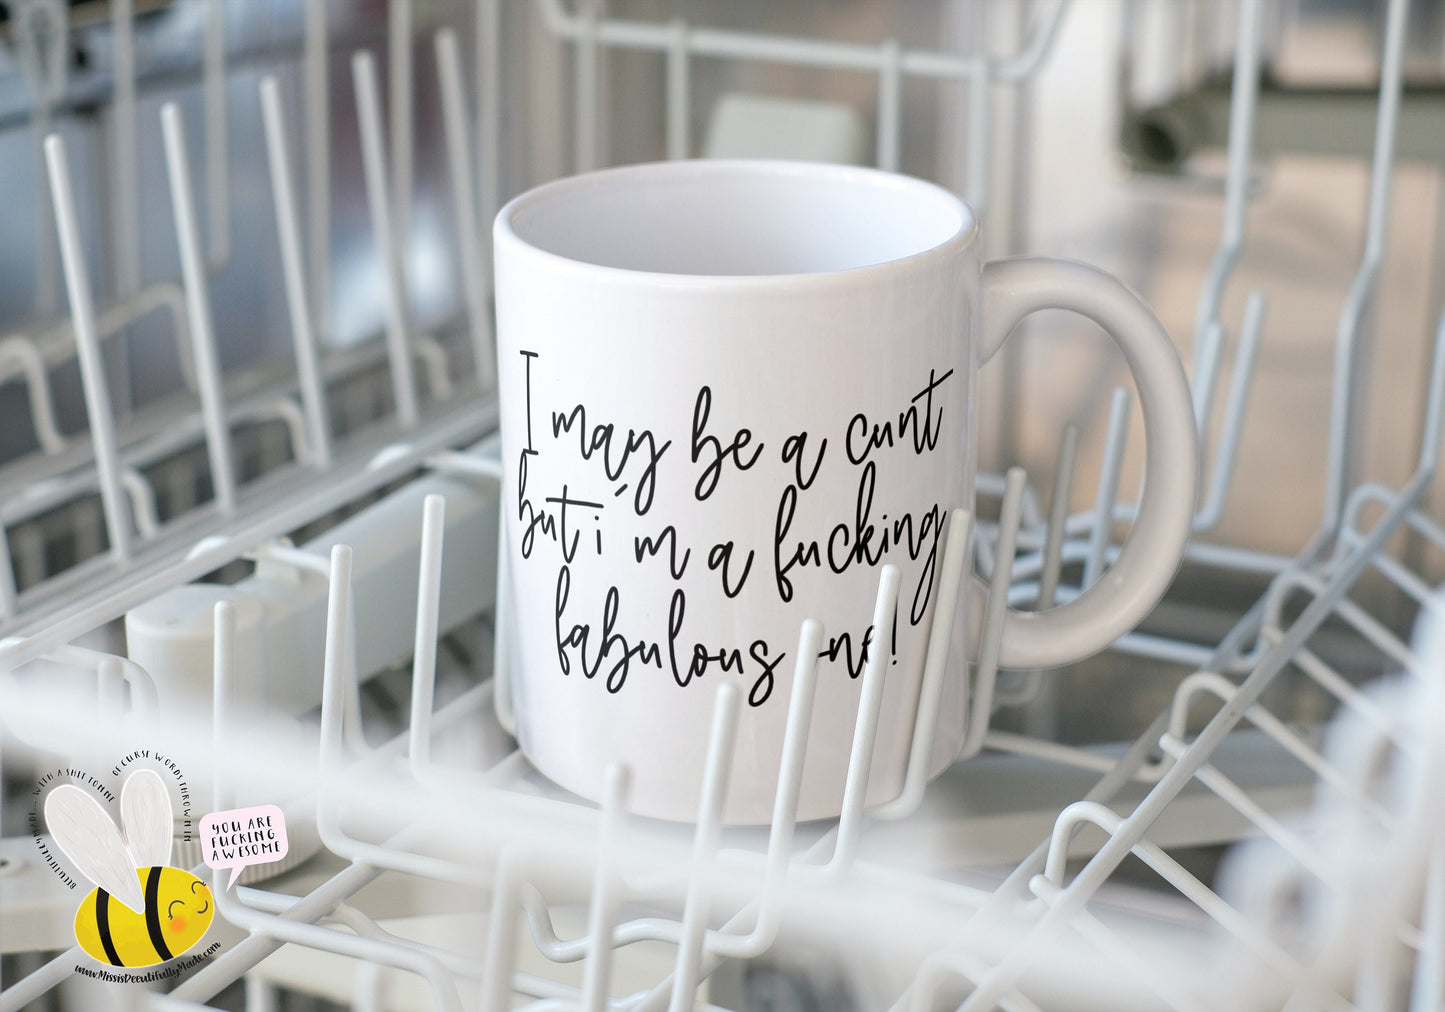 A white ceramic mug featuring the funny quote I may be a cunt, but i'm a fucking fabulous one. Printed in black ink.